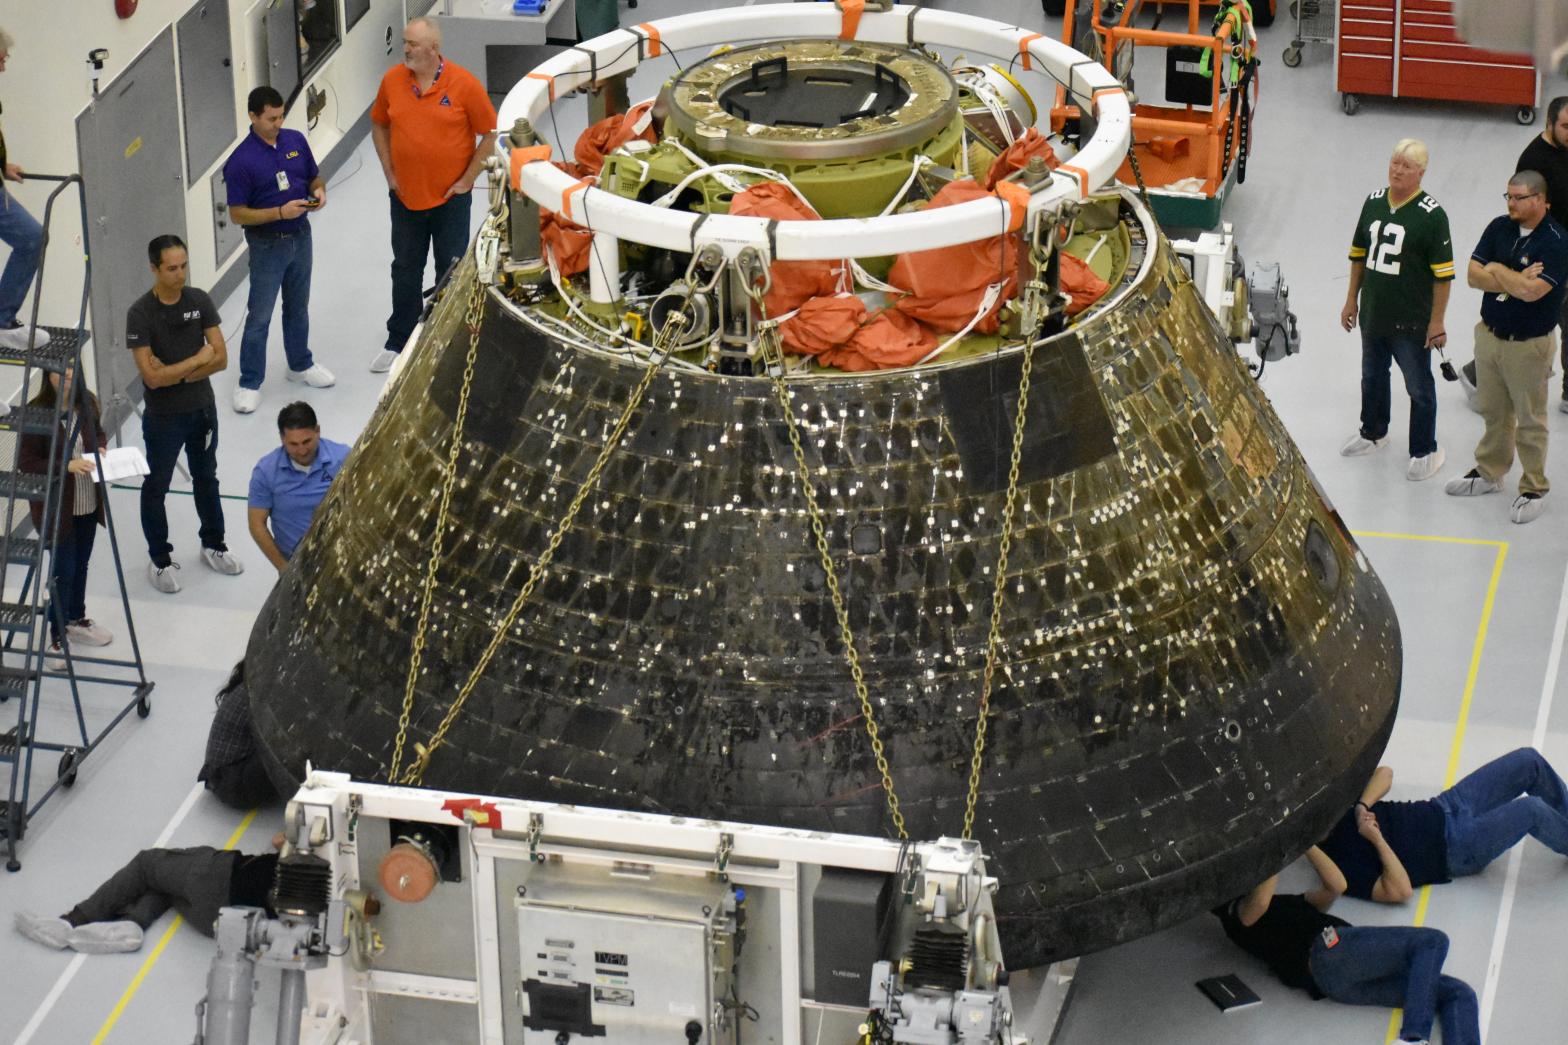 NASA engineers inspecting Orion's heat shield shortly after the Artemis 1 mission.  (Photo: NASA)